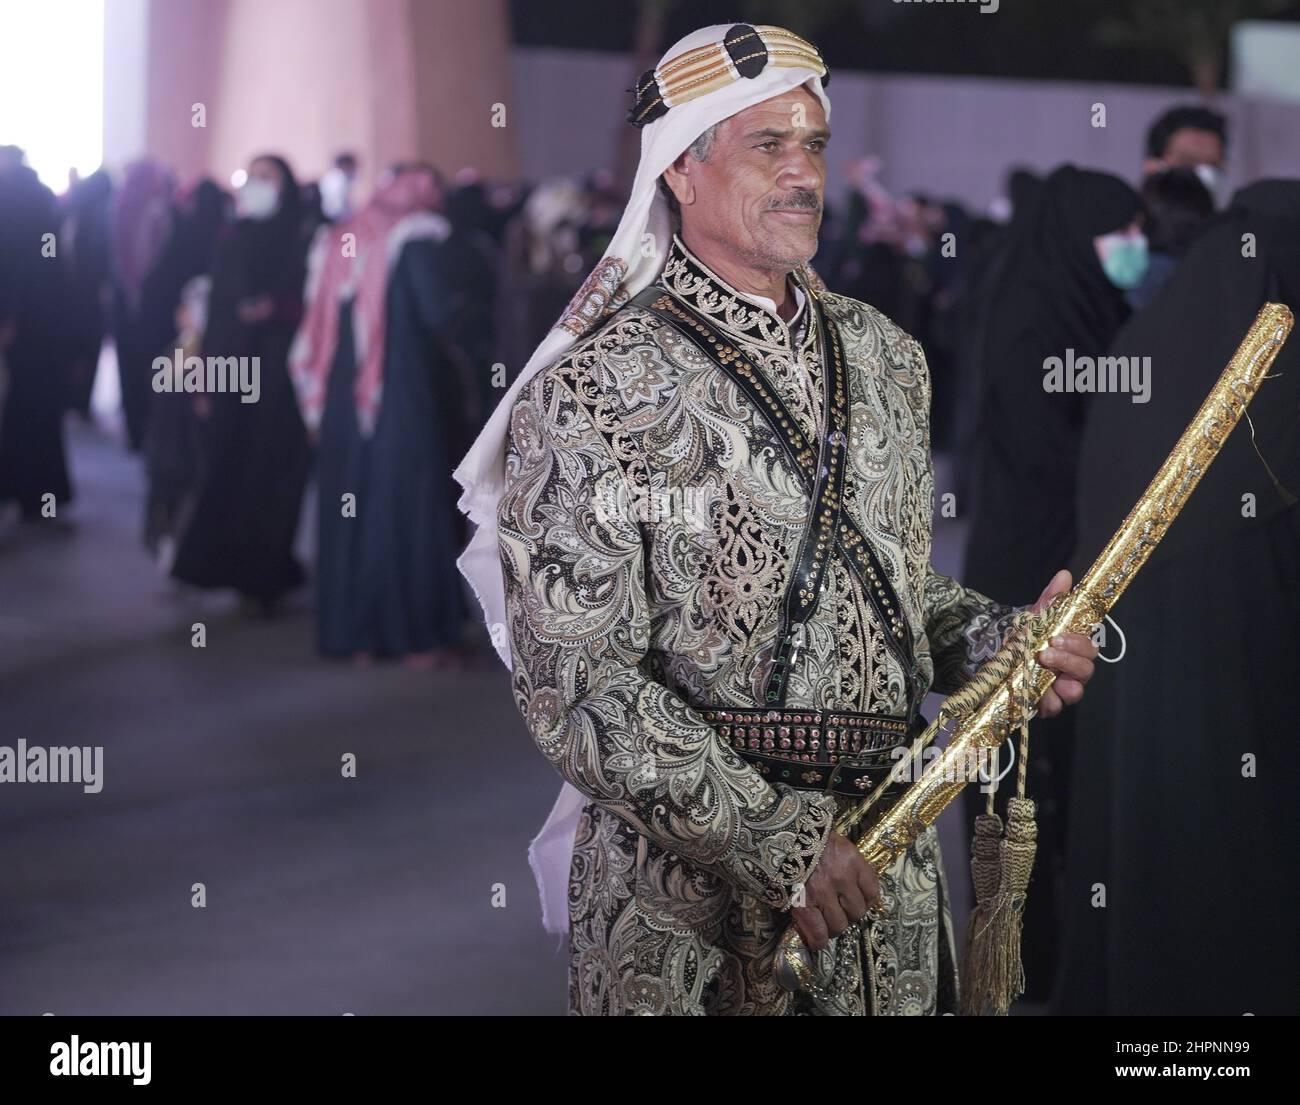 Dammam, Saudi Arabia. 22nd Feb, 2022. A man wearing traditional clothes is seen during the first kingdom's Founding Day celebrations in Dammam, Saudi Arabia, on Feb. 22, 2022. Saudi Arabia on Tuesday marked for the first time ever the kingdom's Founding Day almost three centuries ago. Credit: Mohamed Nasr/Xinhua/Alamy Live News Stock Photo